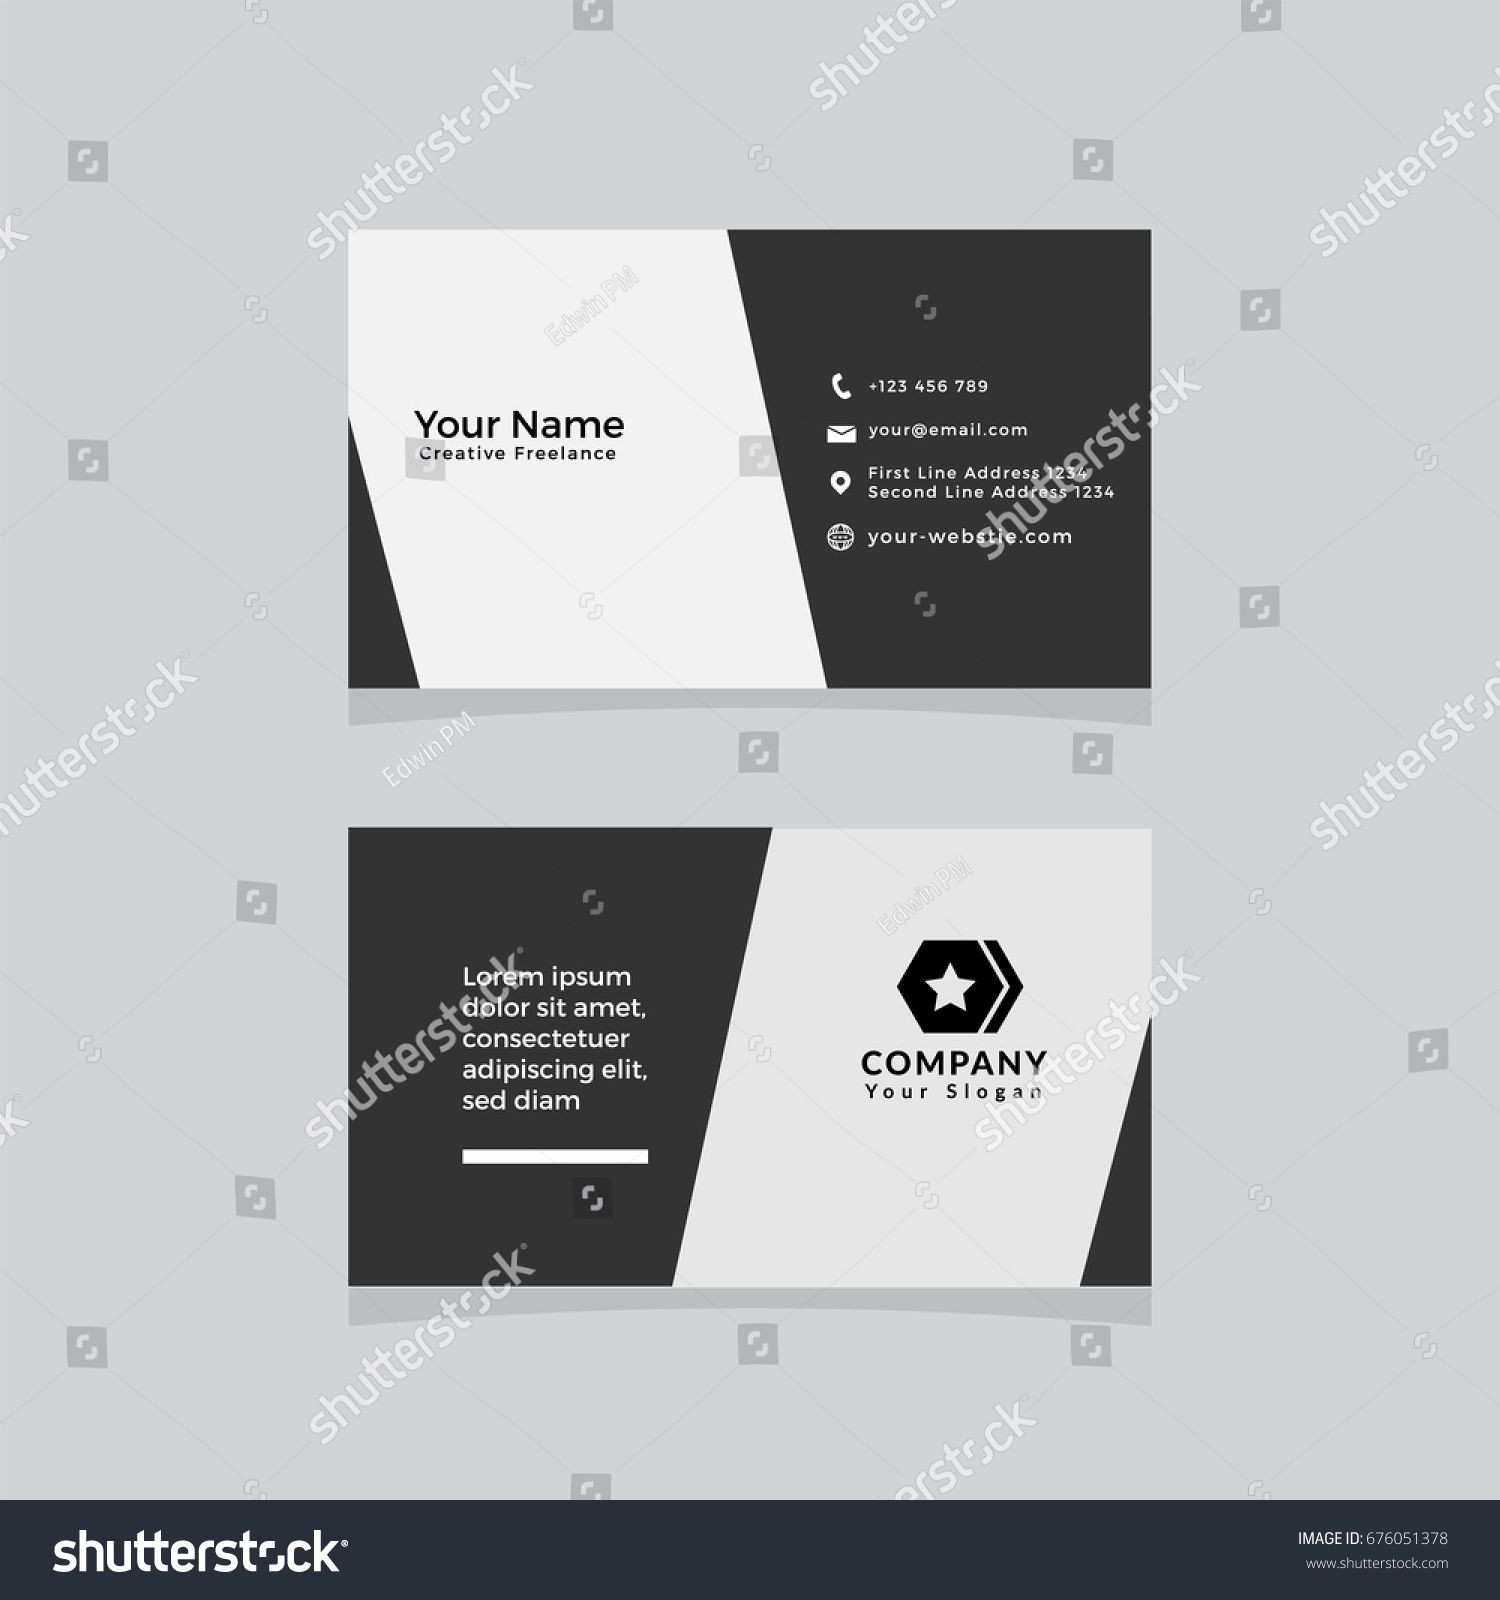 11 Creative Adobe Illustrator Double Sided Business Card For Adobe Illustrator Card Template